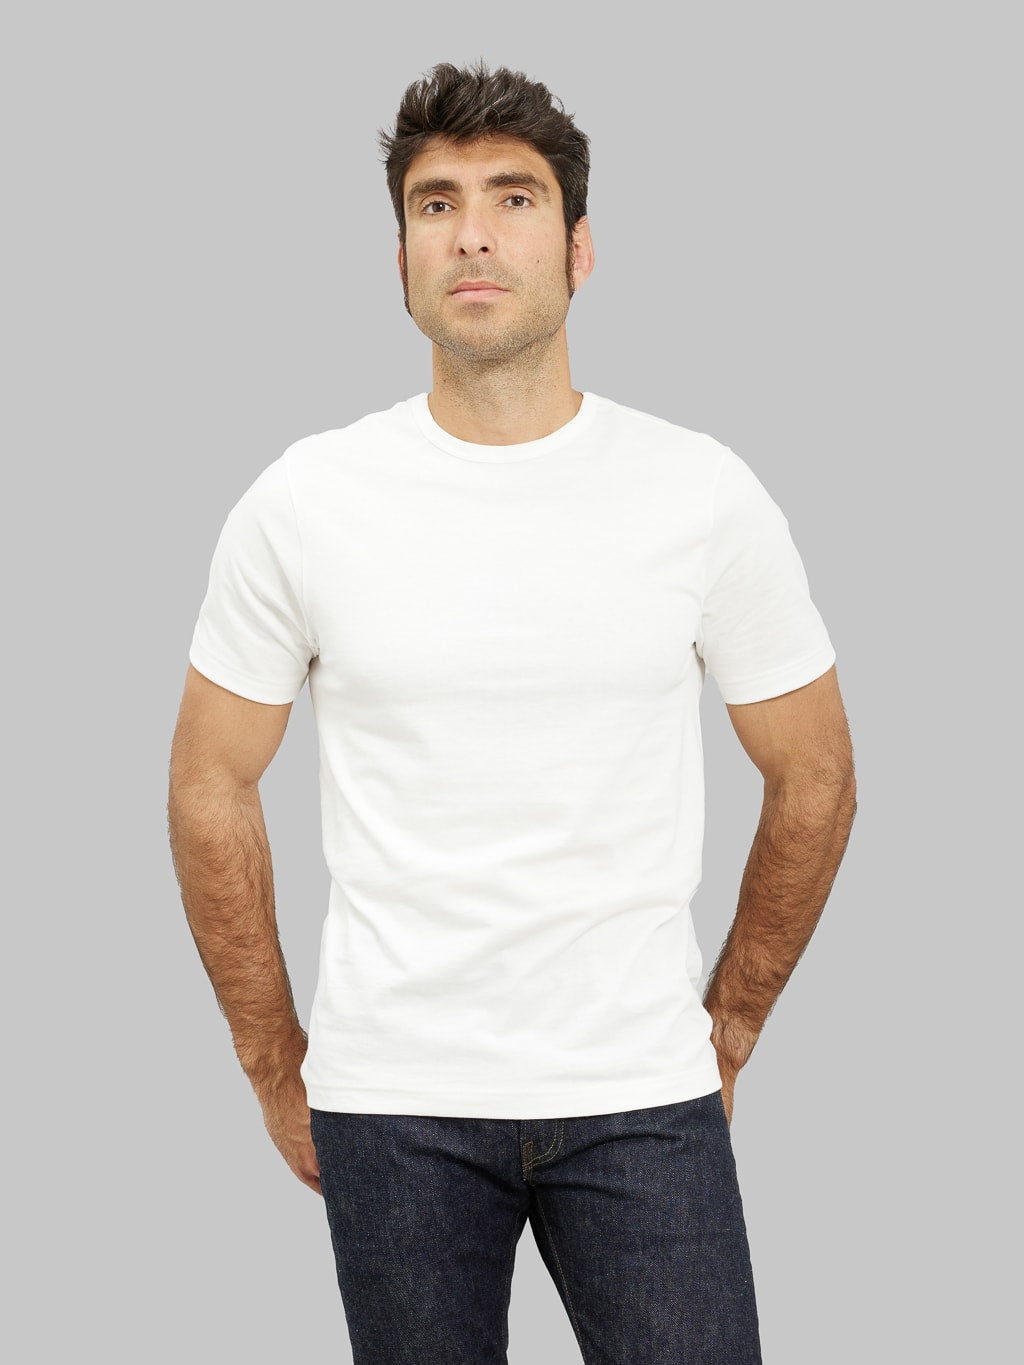 White round neck t-shirts male isolated Royalty Free Vector